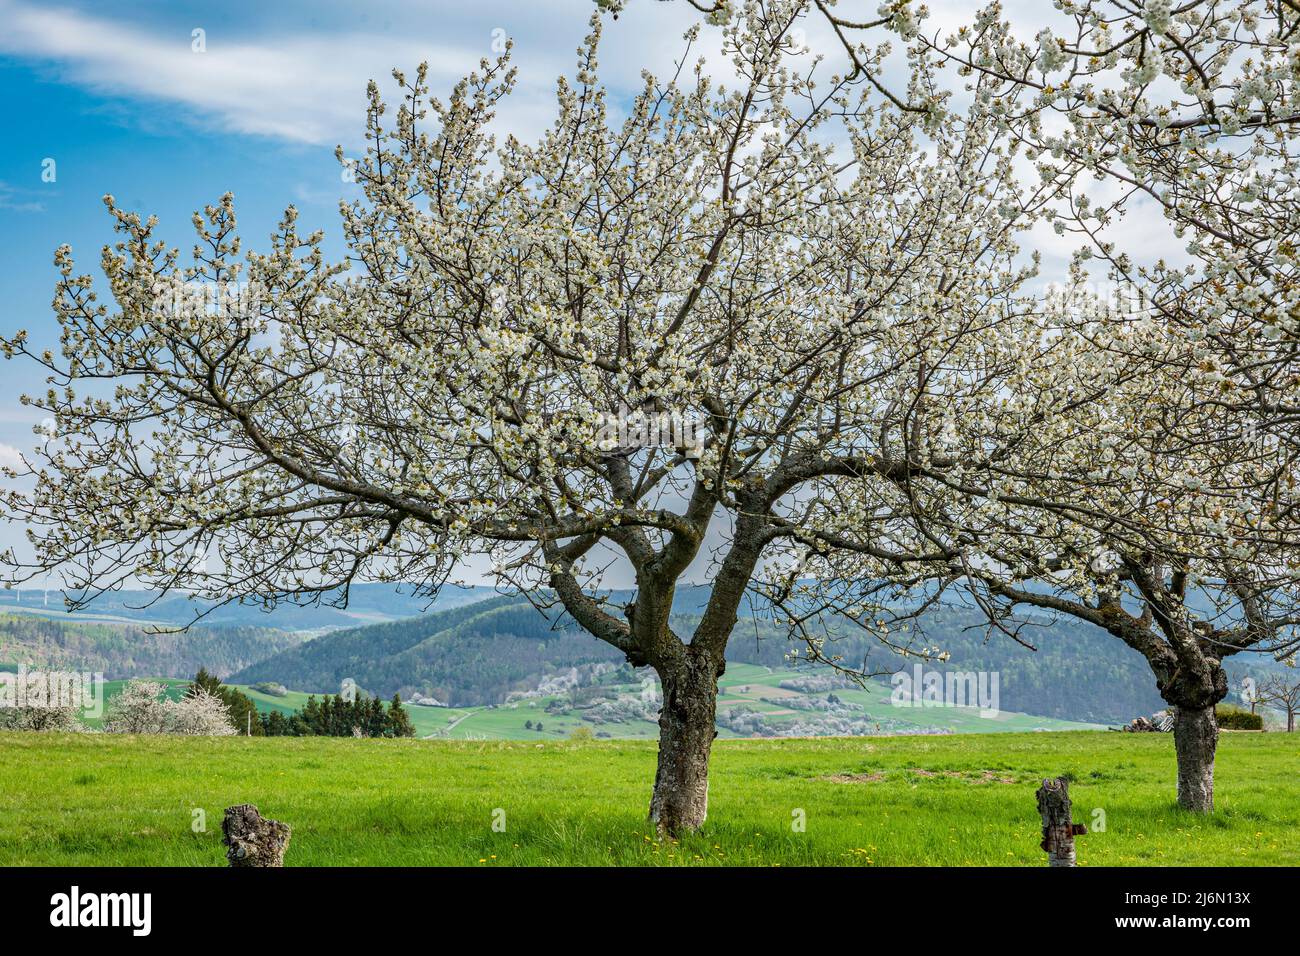 old, white blooming cherry tree against a mountainous, rural background Stock Photo